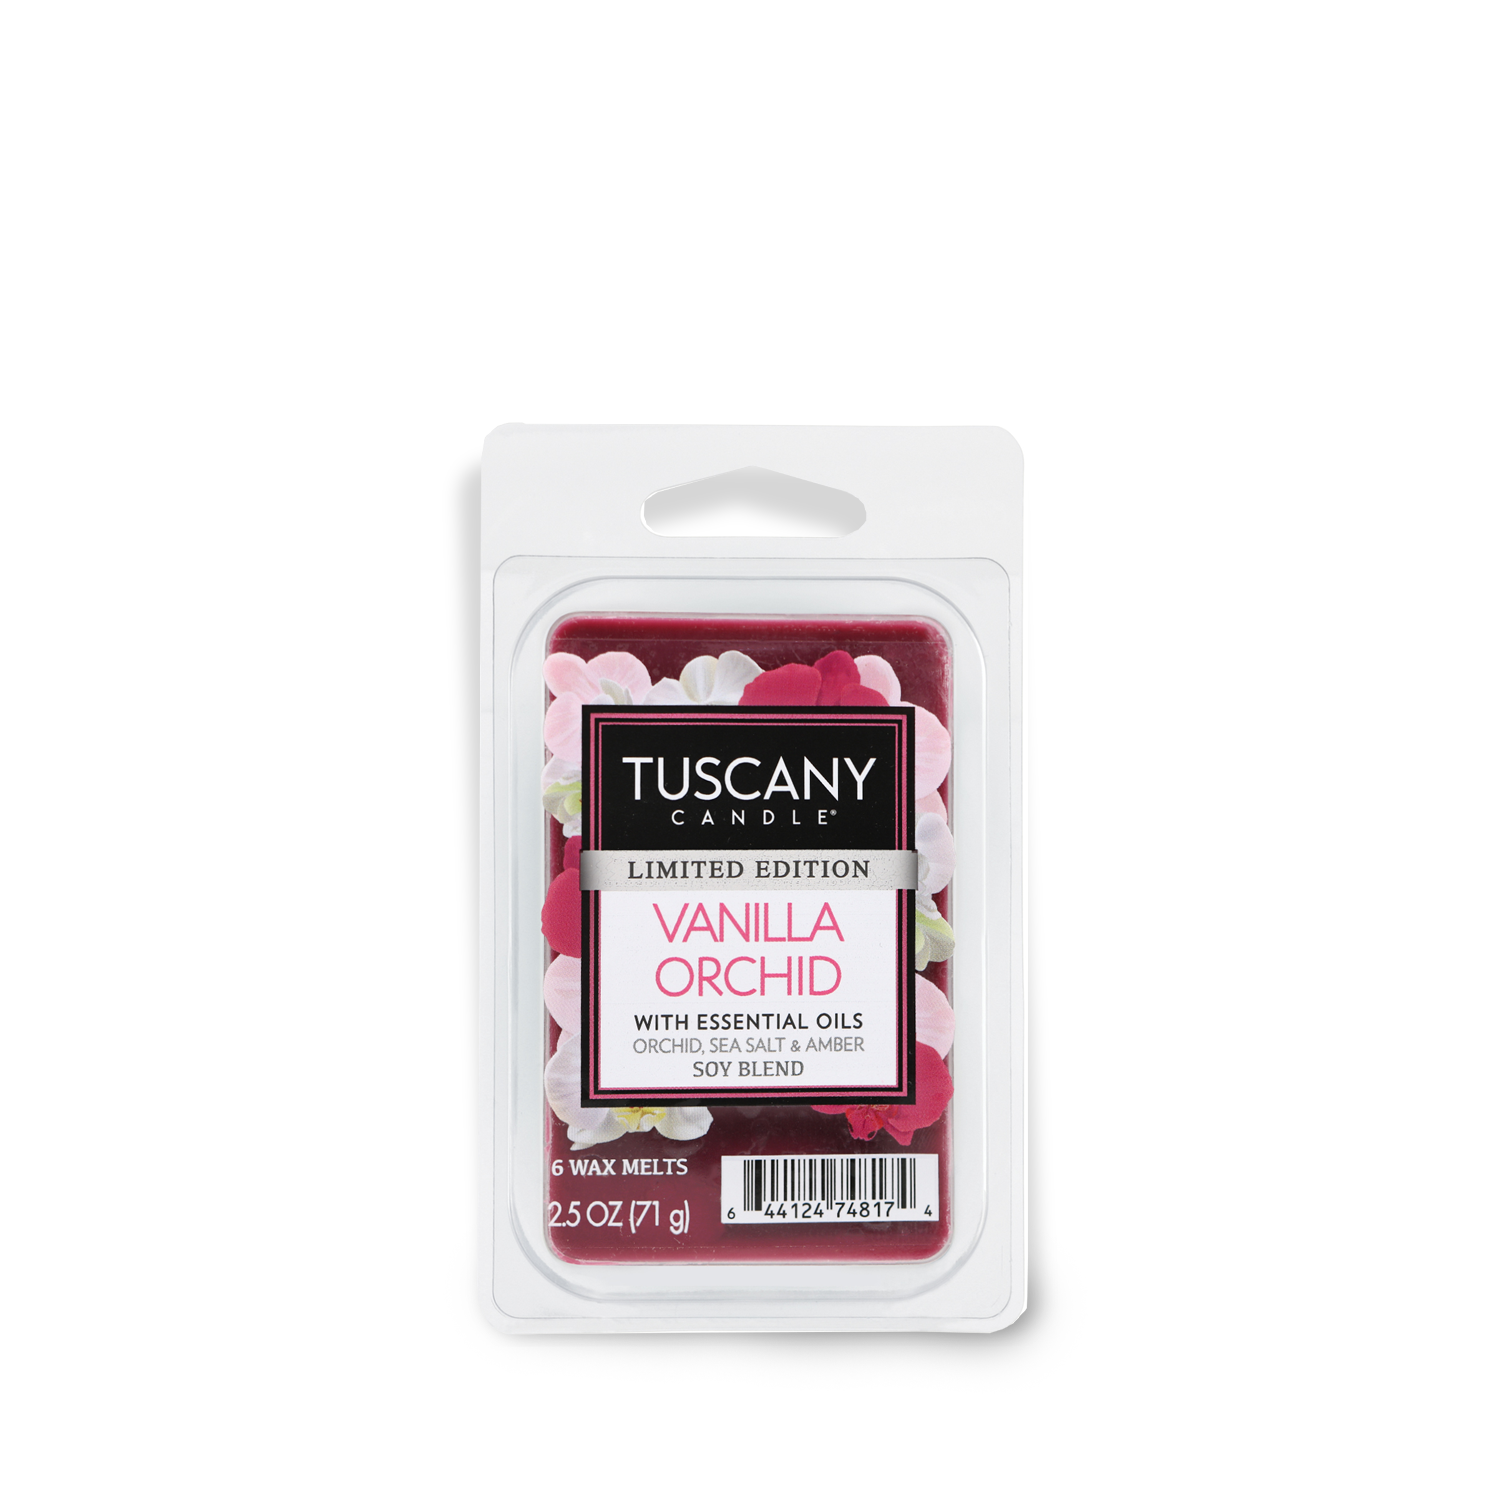 Indulge in the luxurious scent of vanilla orchid with this Tuscany Candle® SEASONAL Vanilla Orchid Scented Wax Melt (2.5 oz) bar from the Summer Collection.